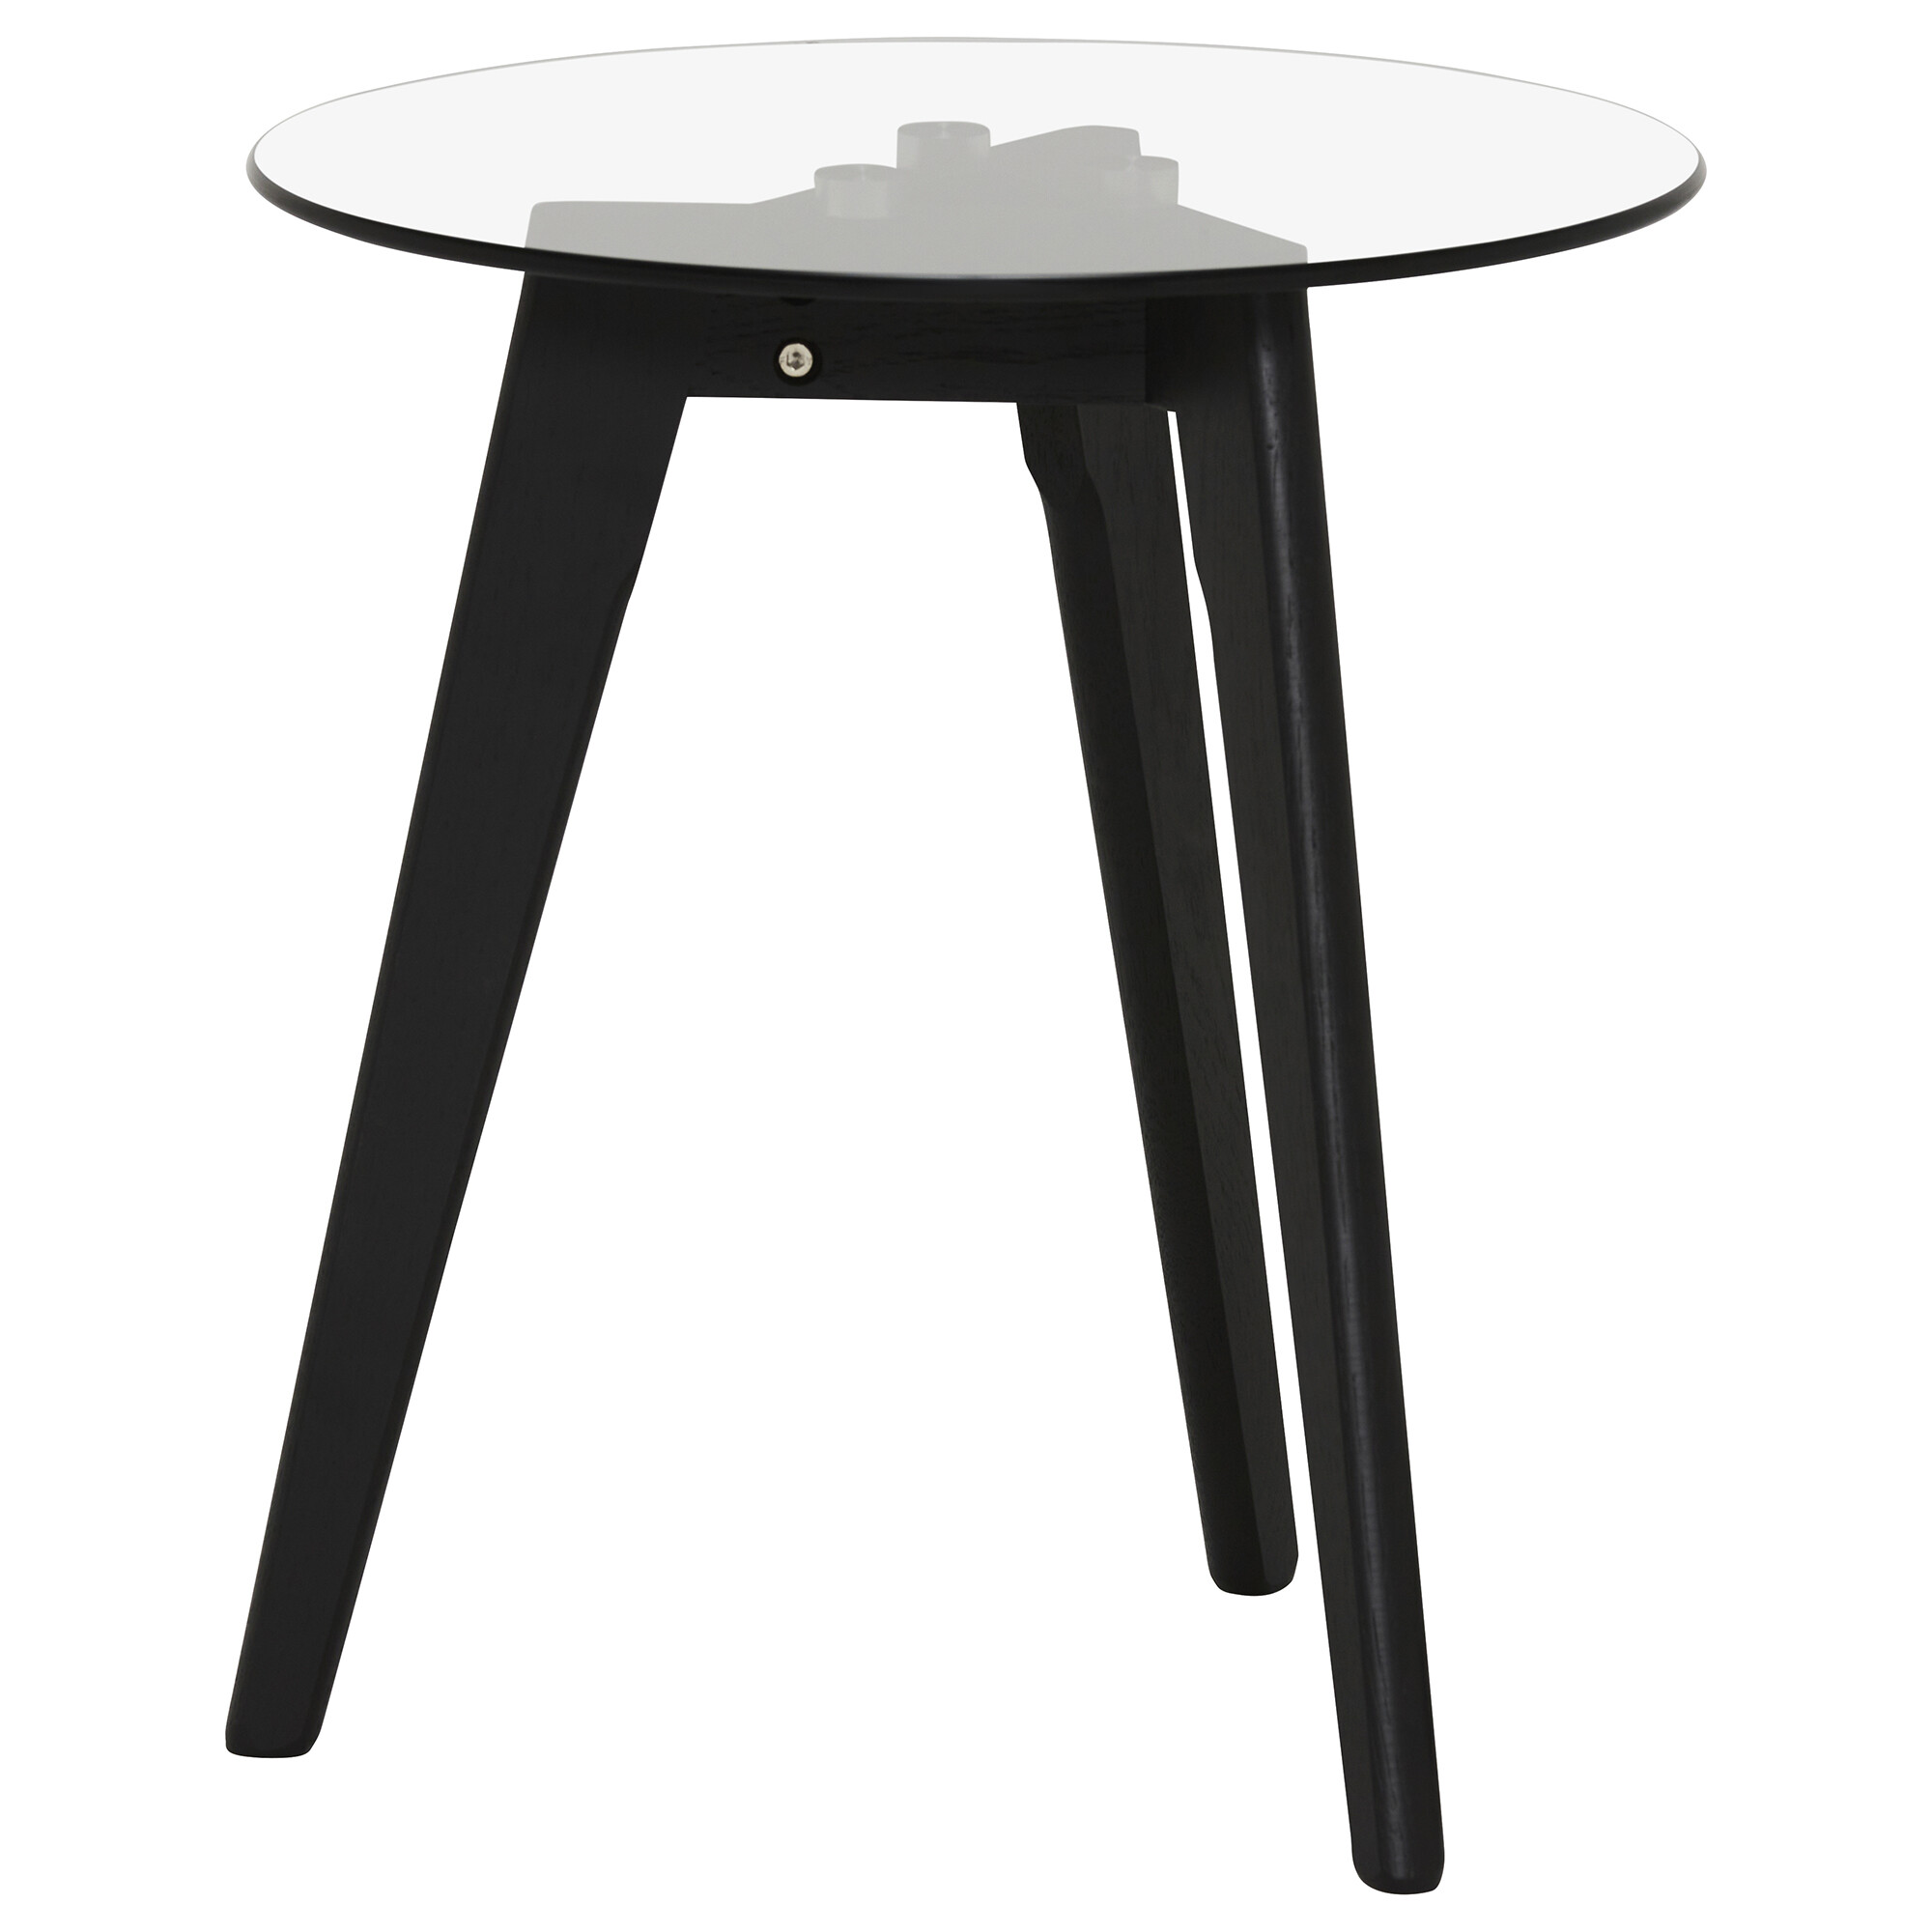 Aries Round Side Table, Round, Black | Barker & Stonehouse